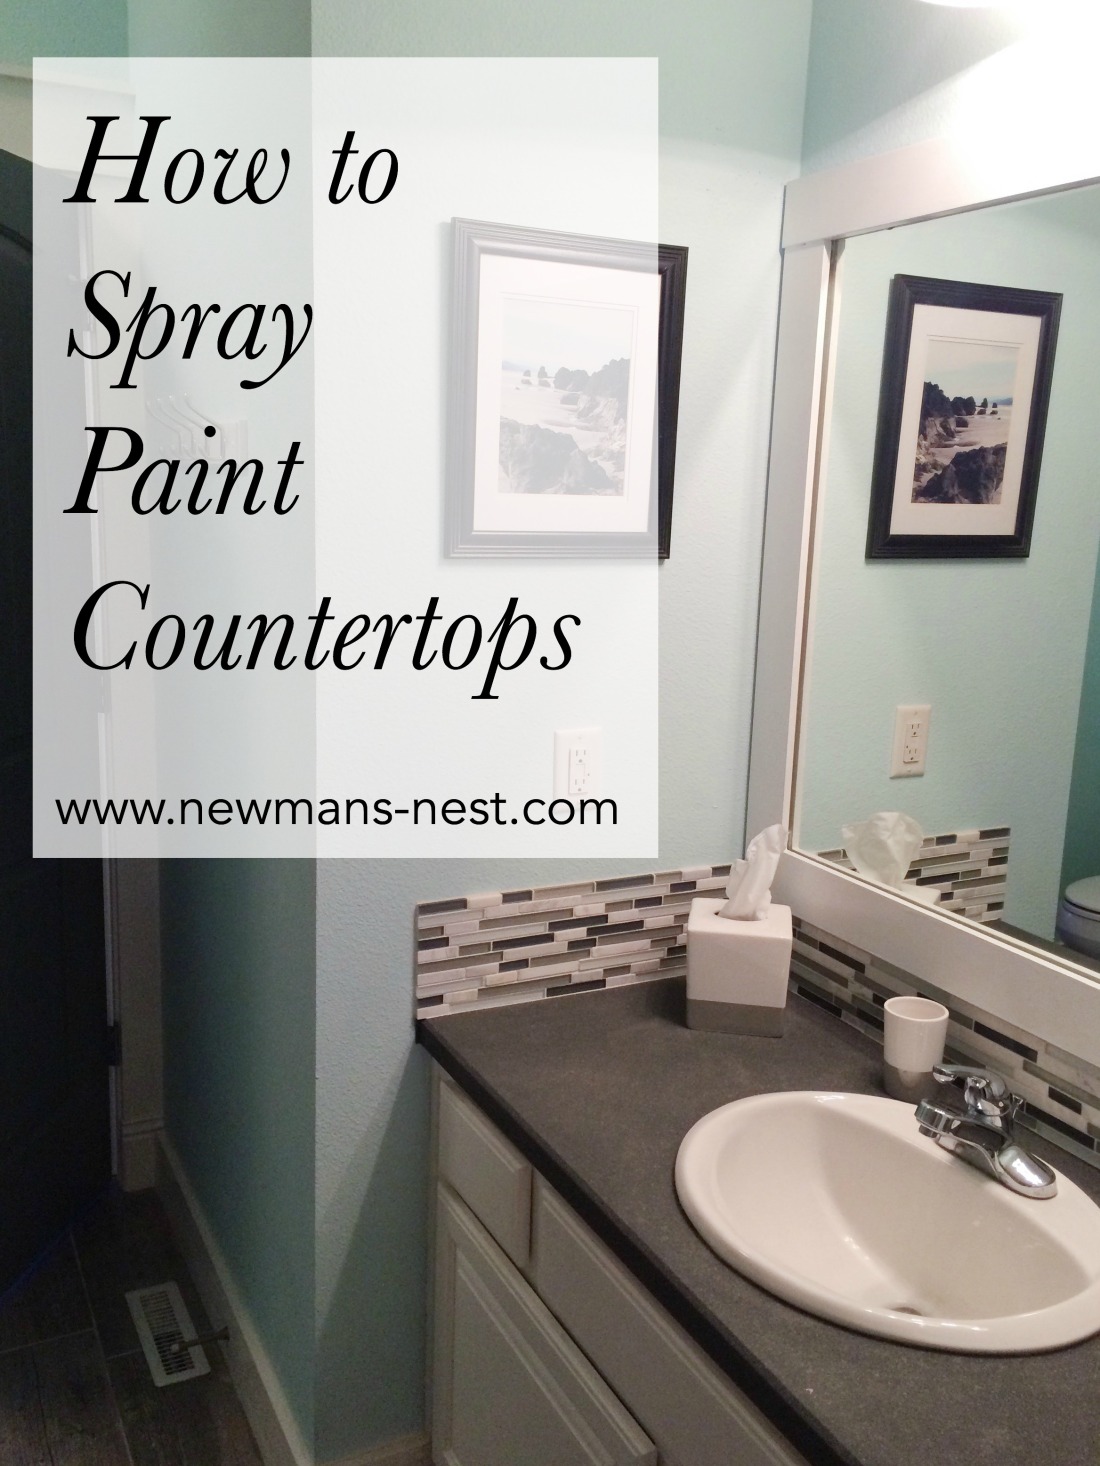 howtospraypaintcountertops, spray paint countertops, remodel, DIY home project